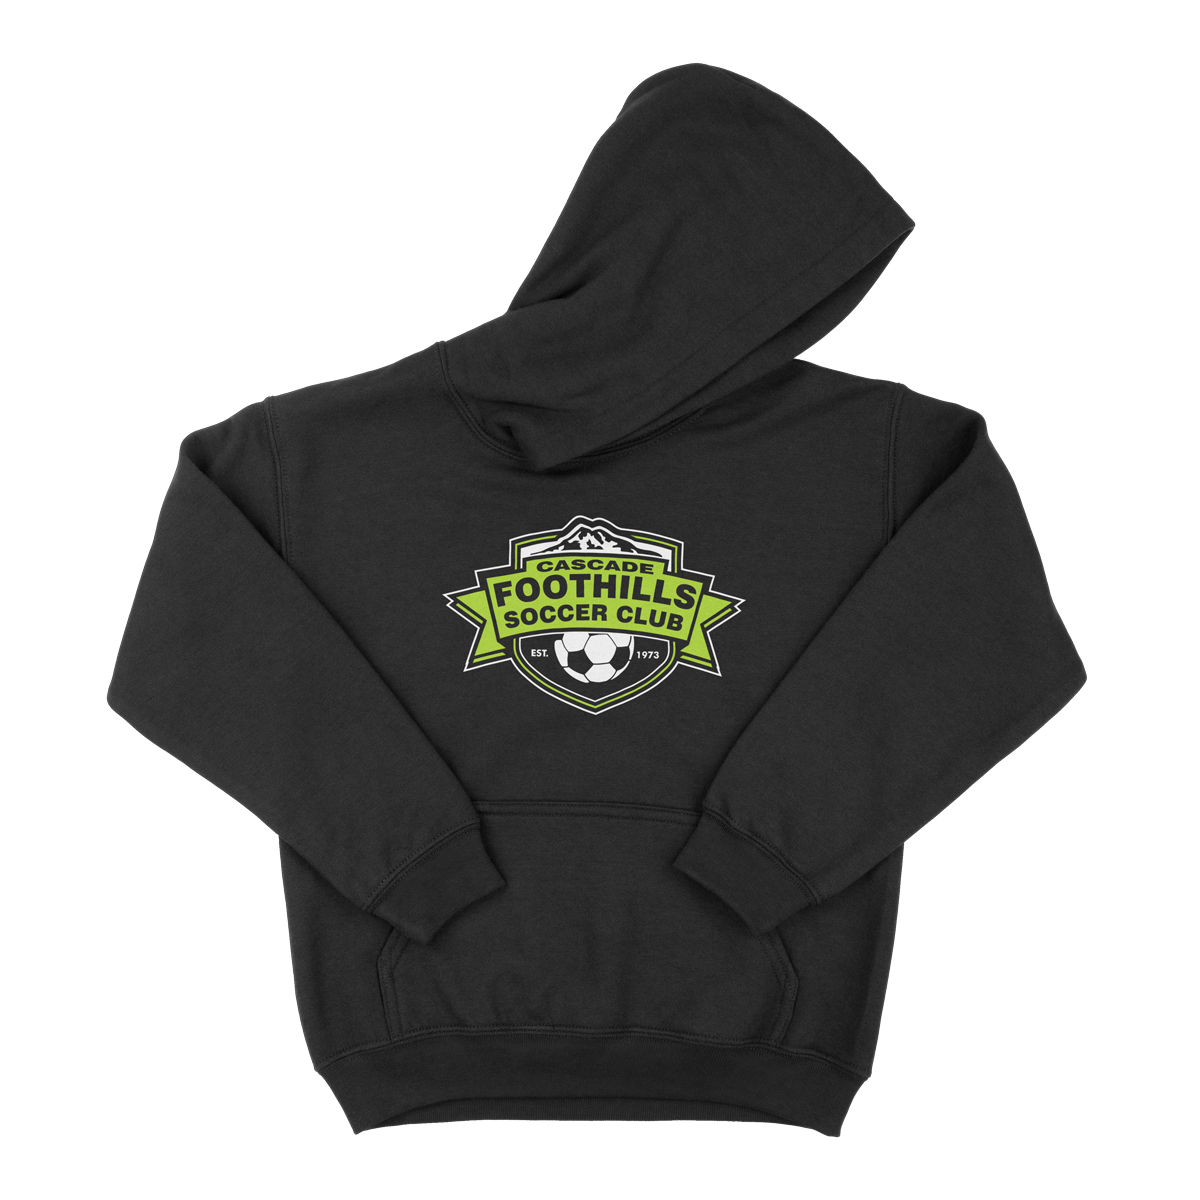 Cascade Foothills Logo Hoody - Youth